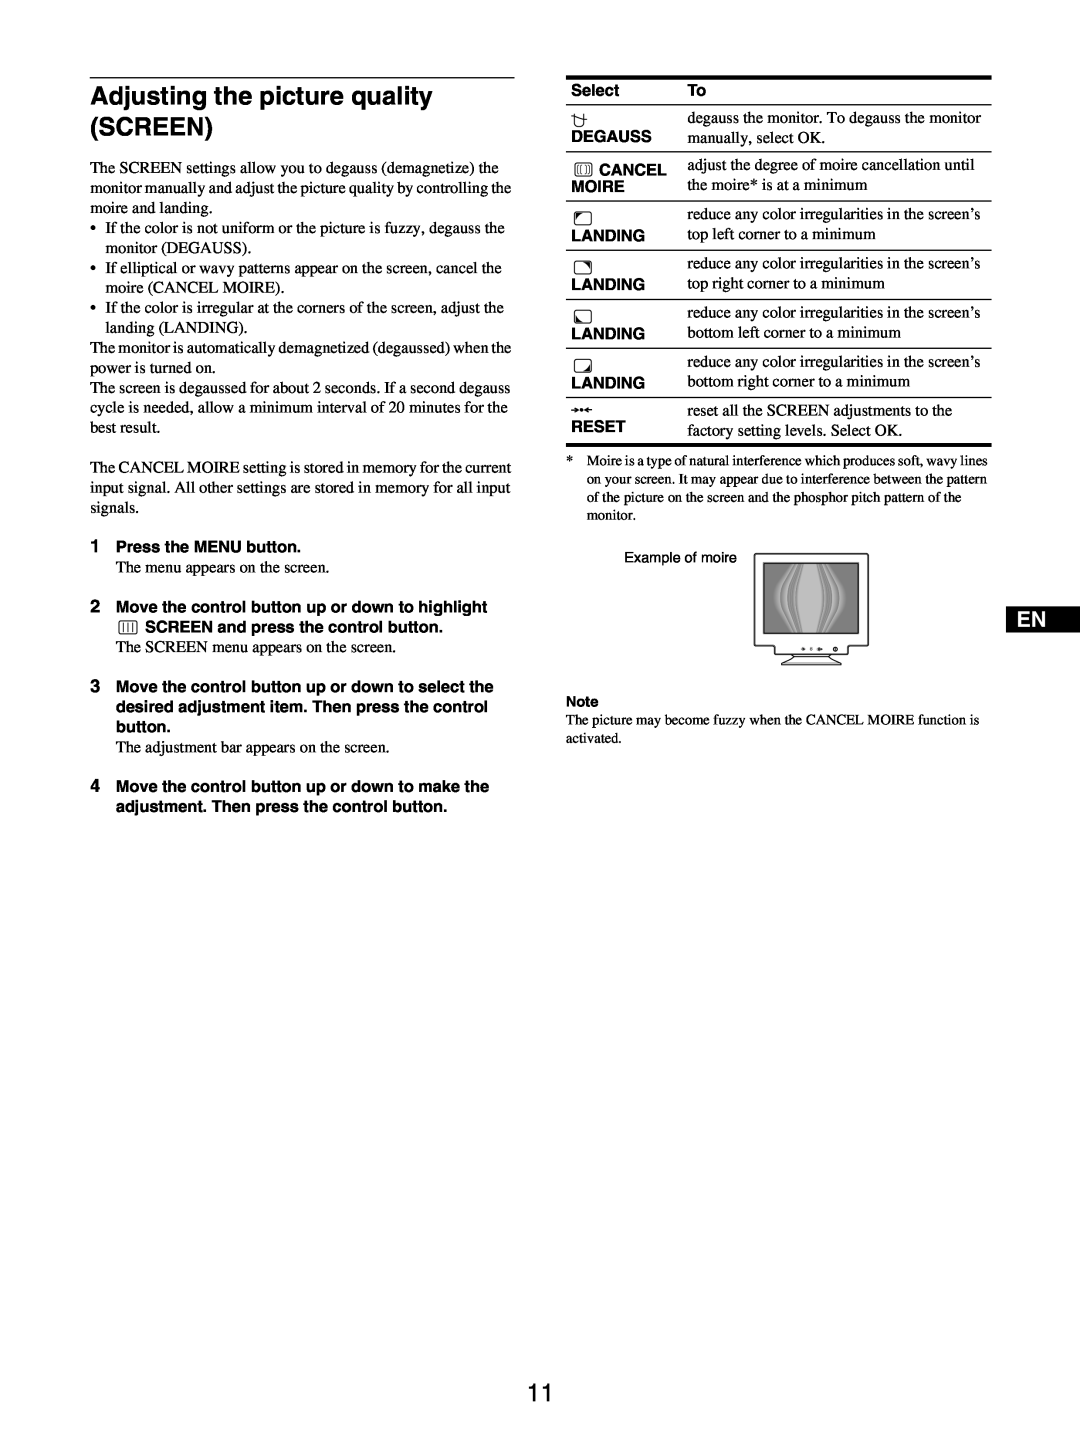 Sony GDM-5510 operating instructions Adjusting the picture quality SCREEN, Example of moire 